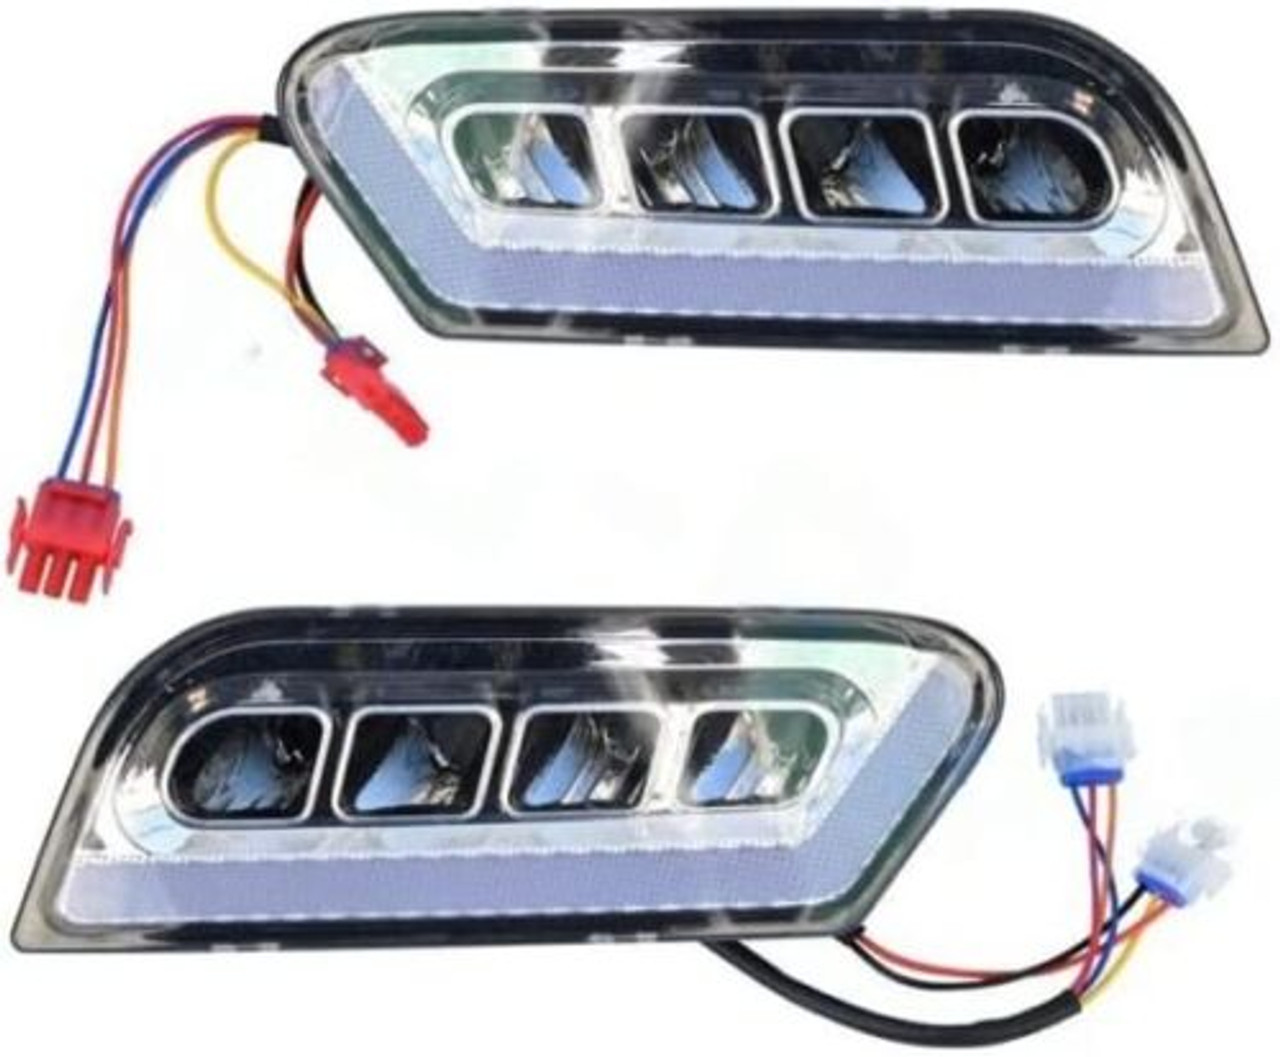 Deluxe LED Light Kit for Club Car Tempo Golf Carts with RGB Daytime Running Light for Safe and Stylish Driving, LIGHT-102